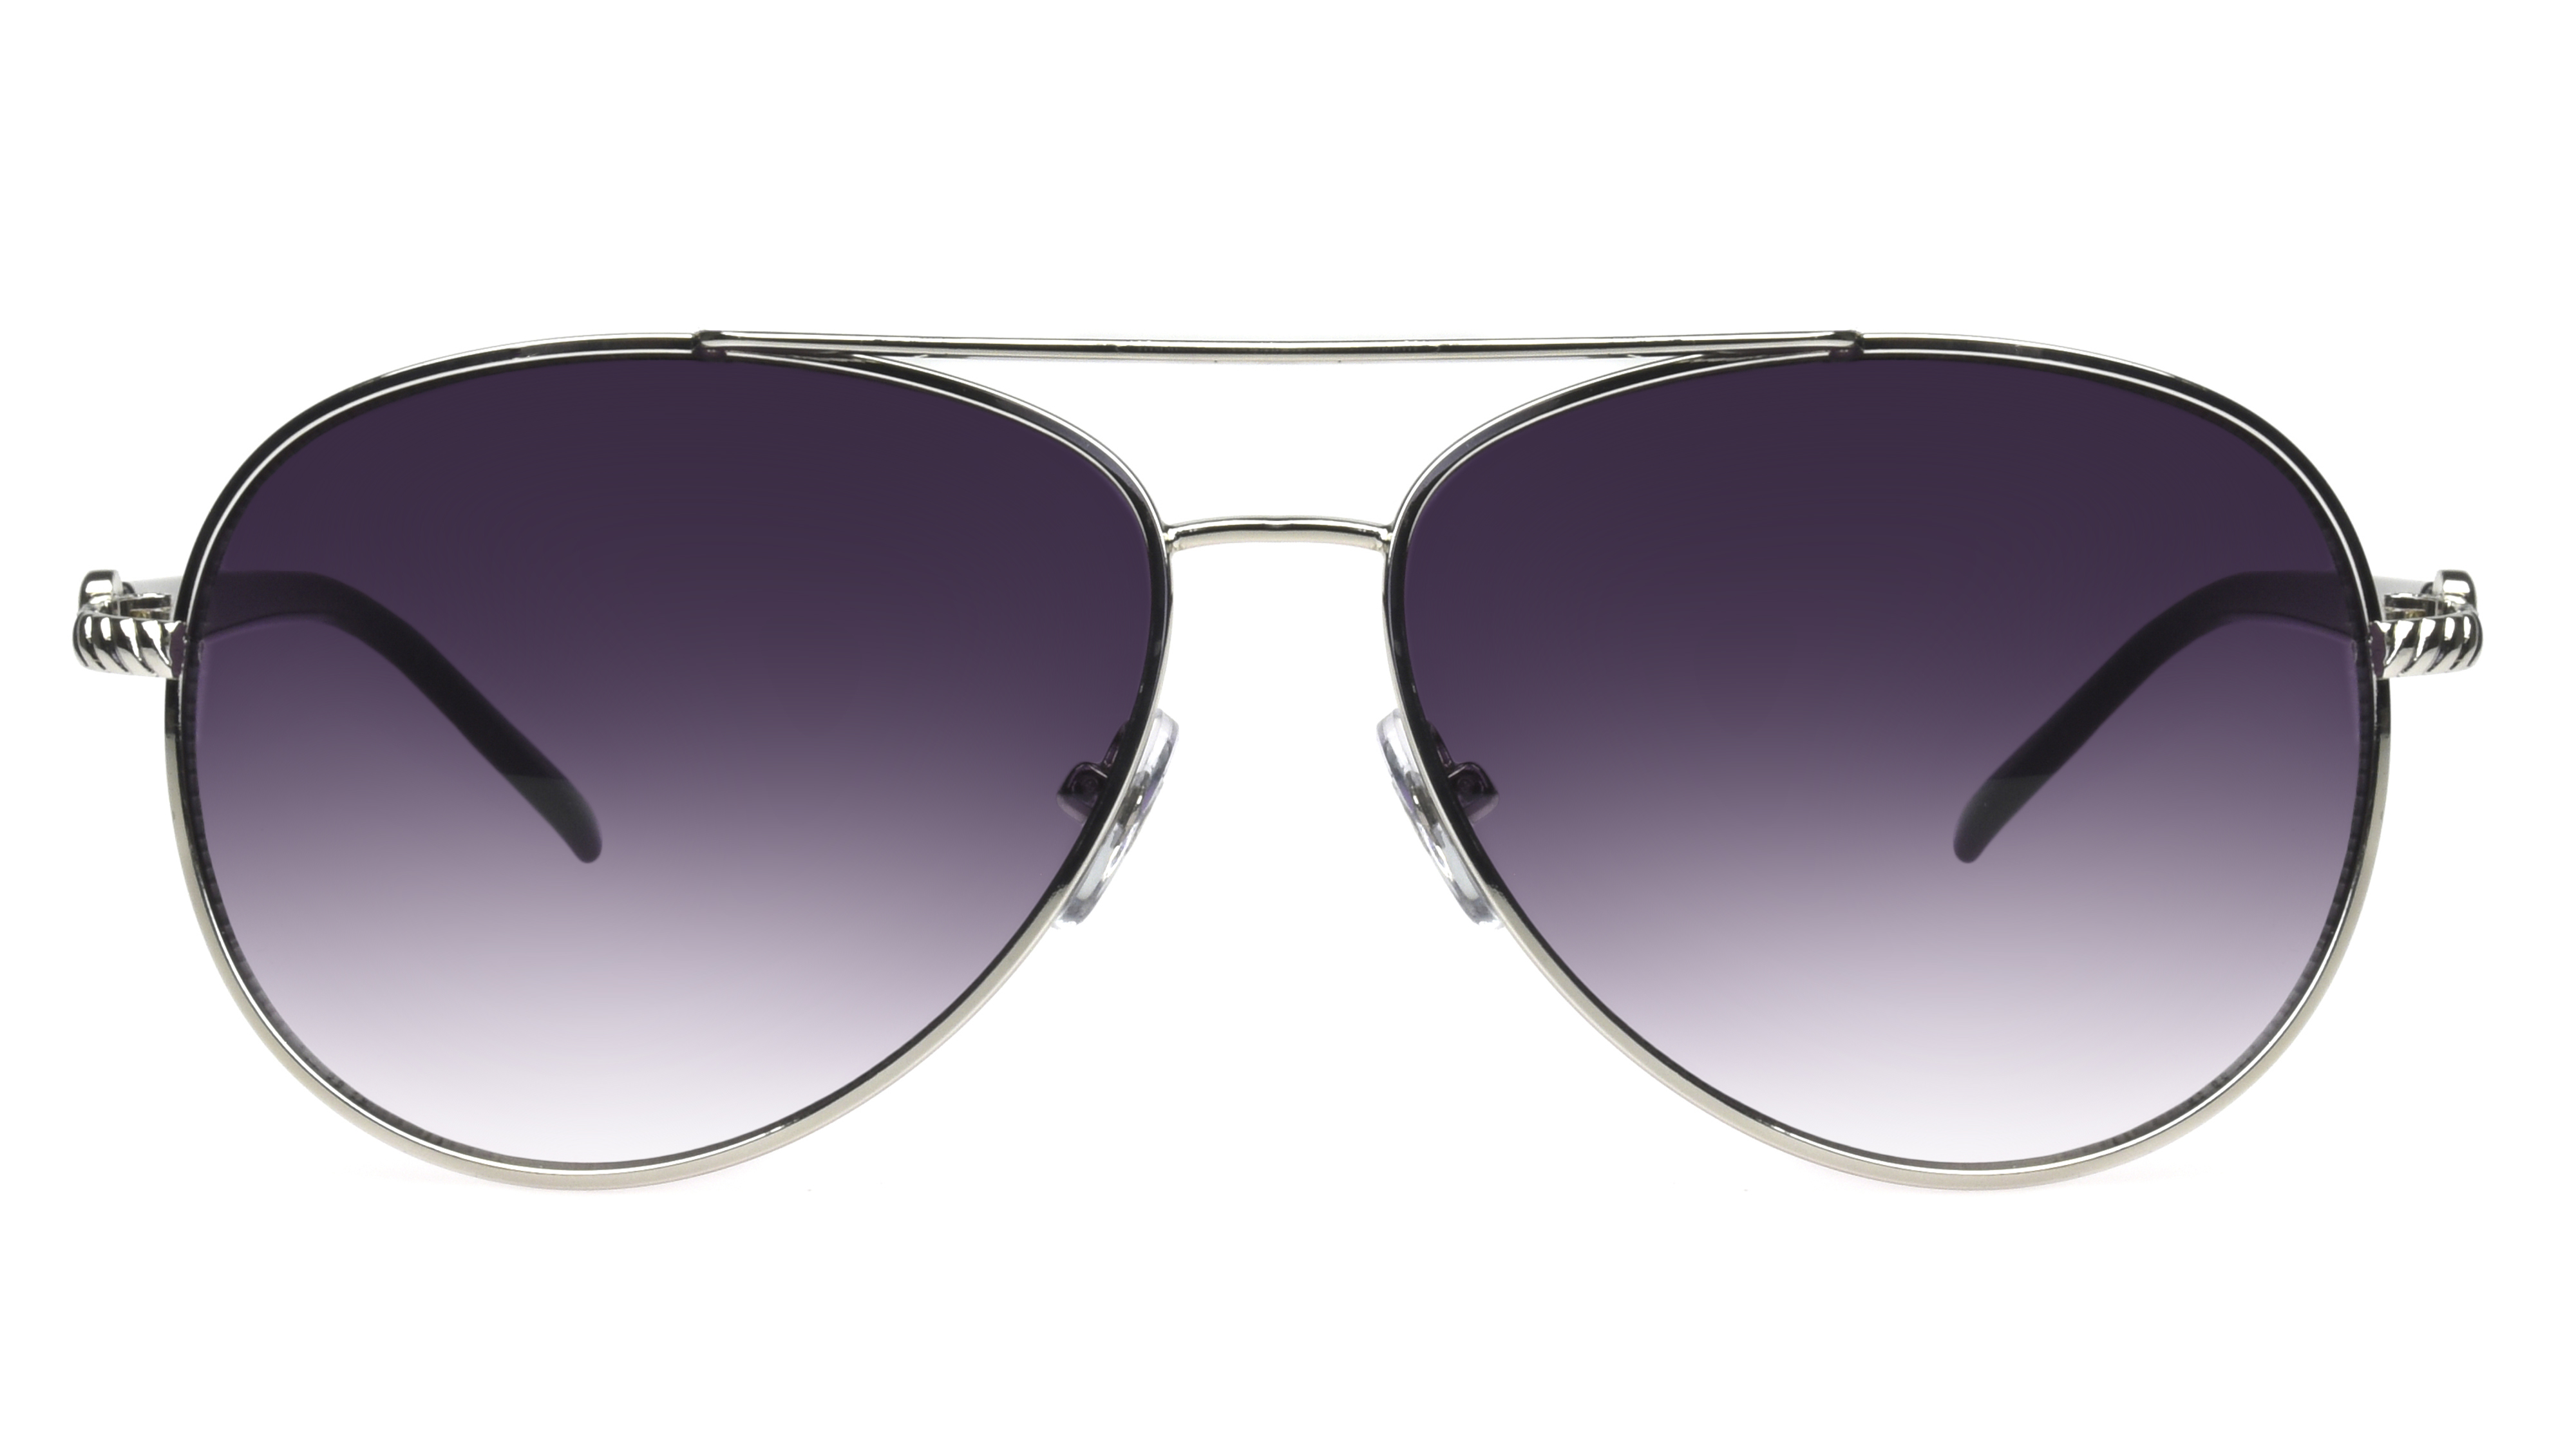 Steve Madden Women's Silver and Black Stone Accented Aviator Sunglasses - image 1 of 3